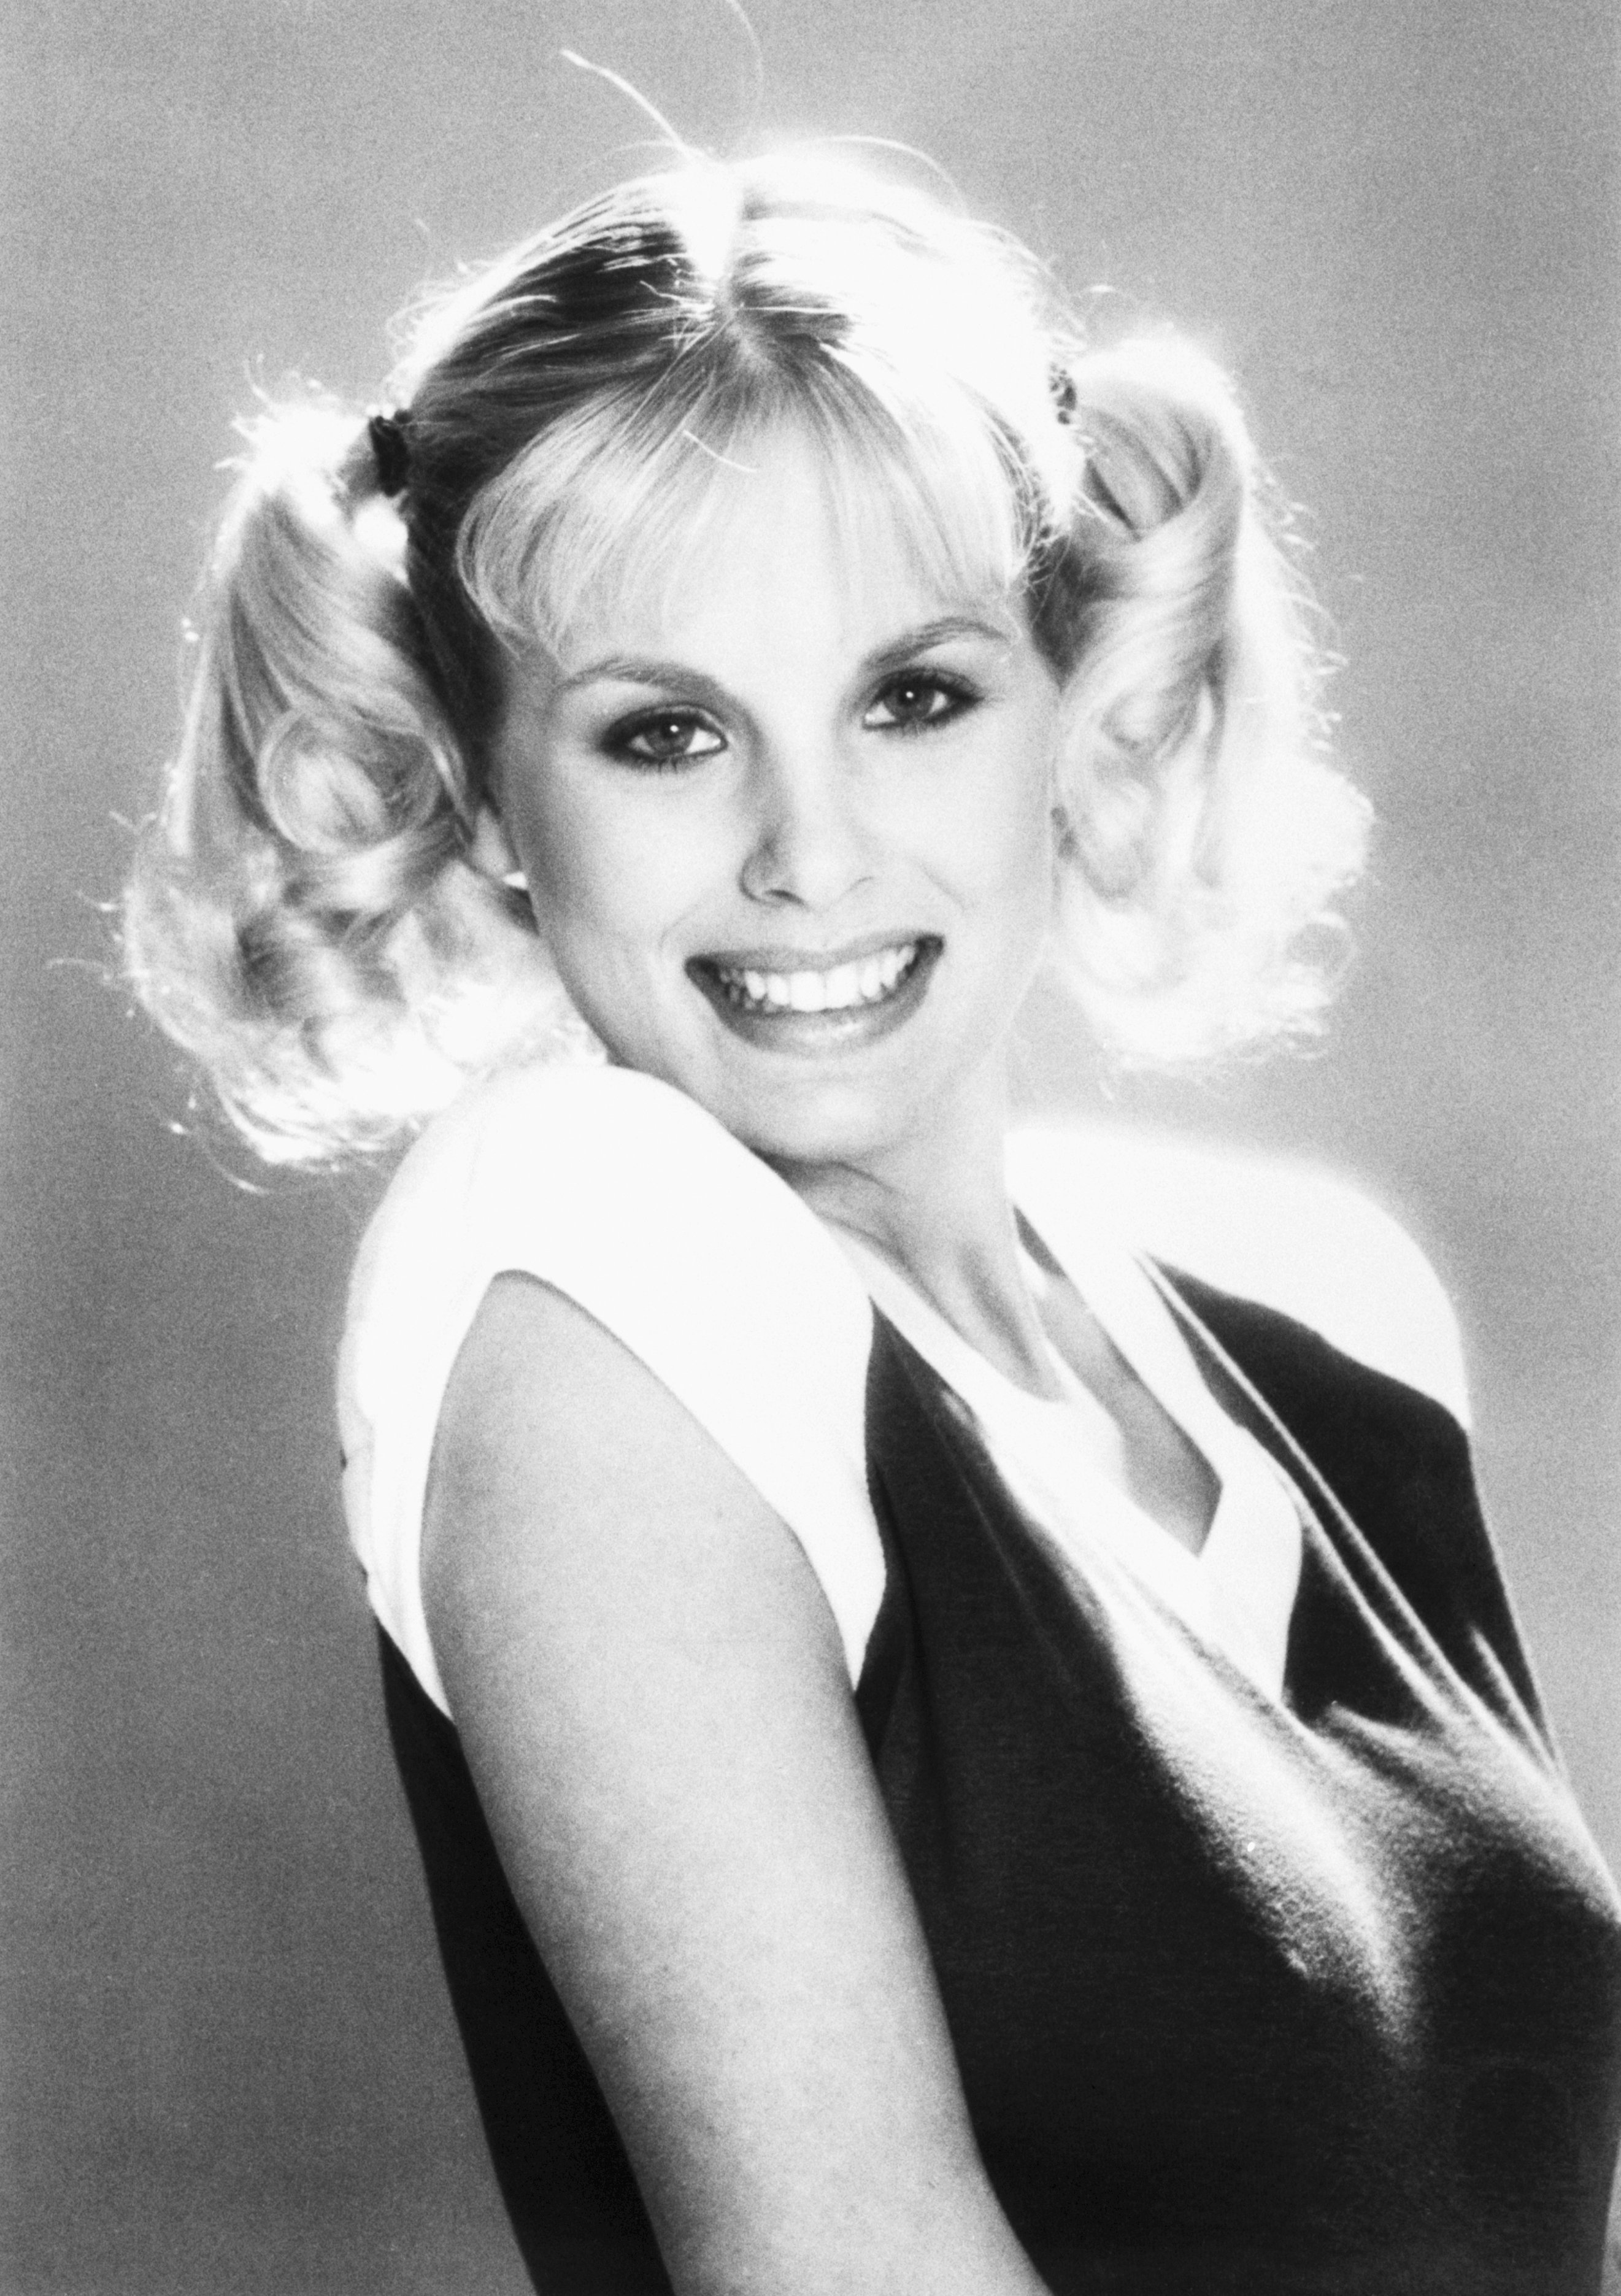  Playboy Magazine's 1980 Playmate of the Year, Dorothy Stratten, 20, on  8/15/1980-Los Angeles | Source: Getty Images